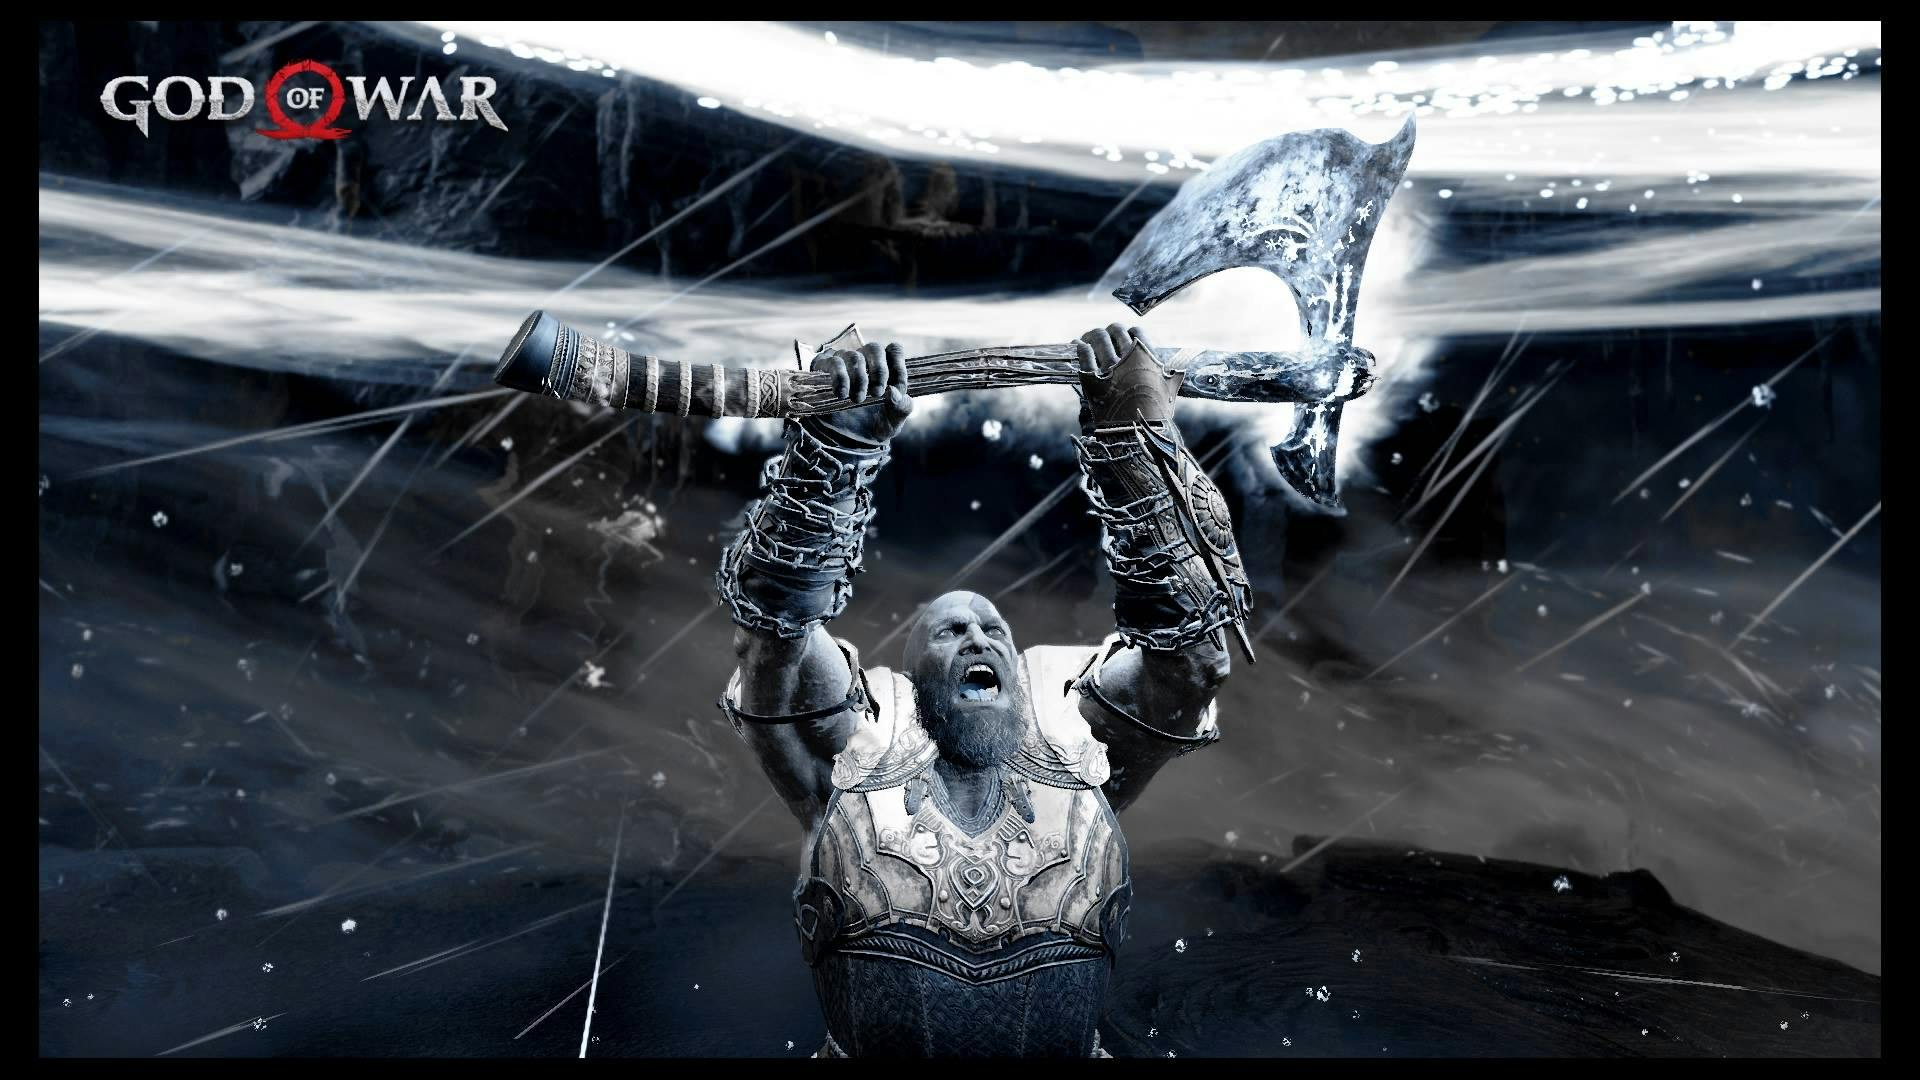 Free stock photo of god of war